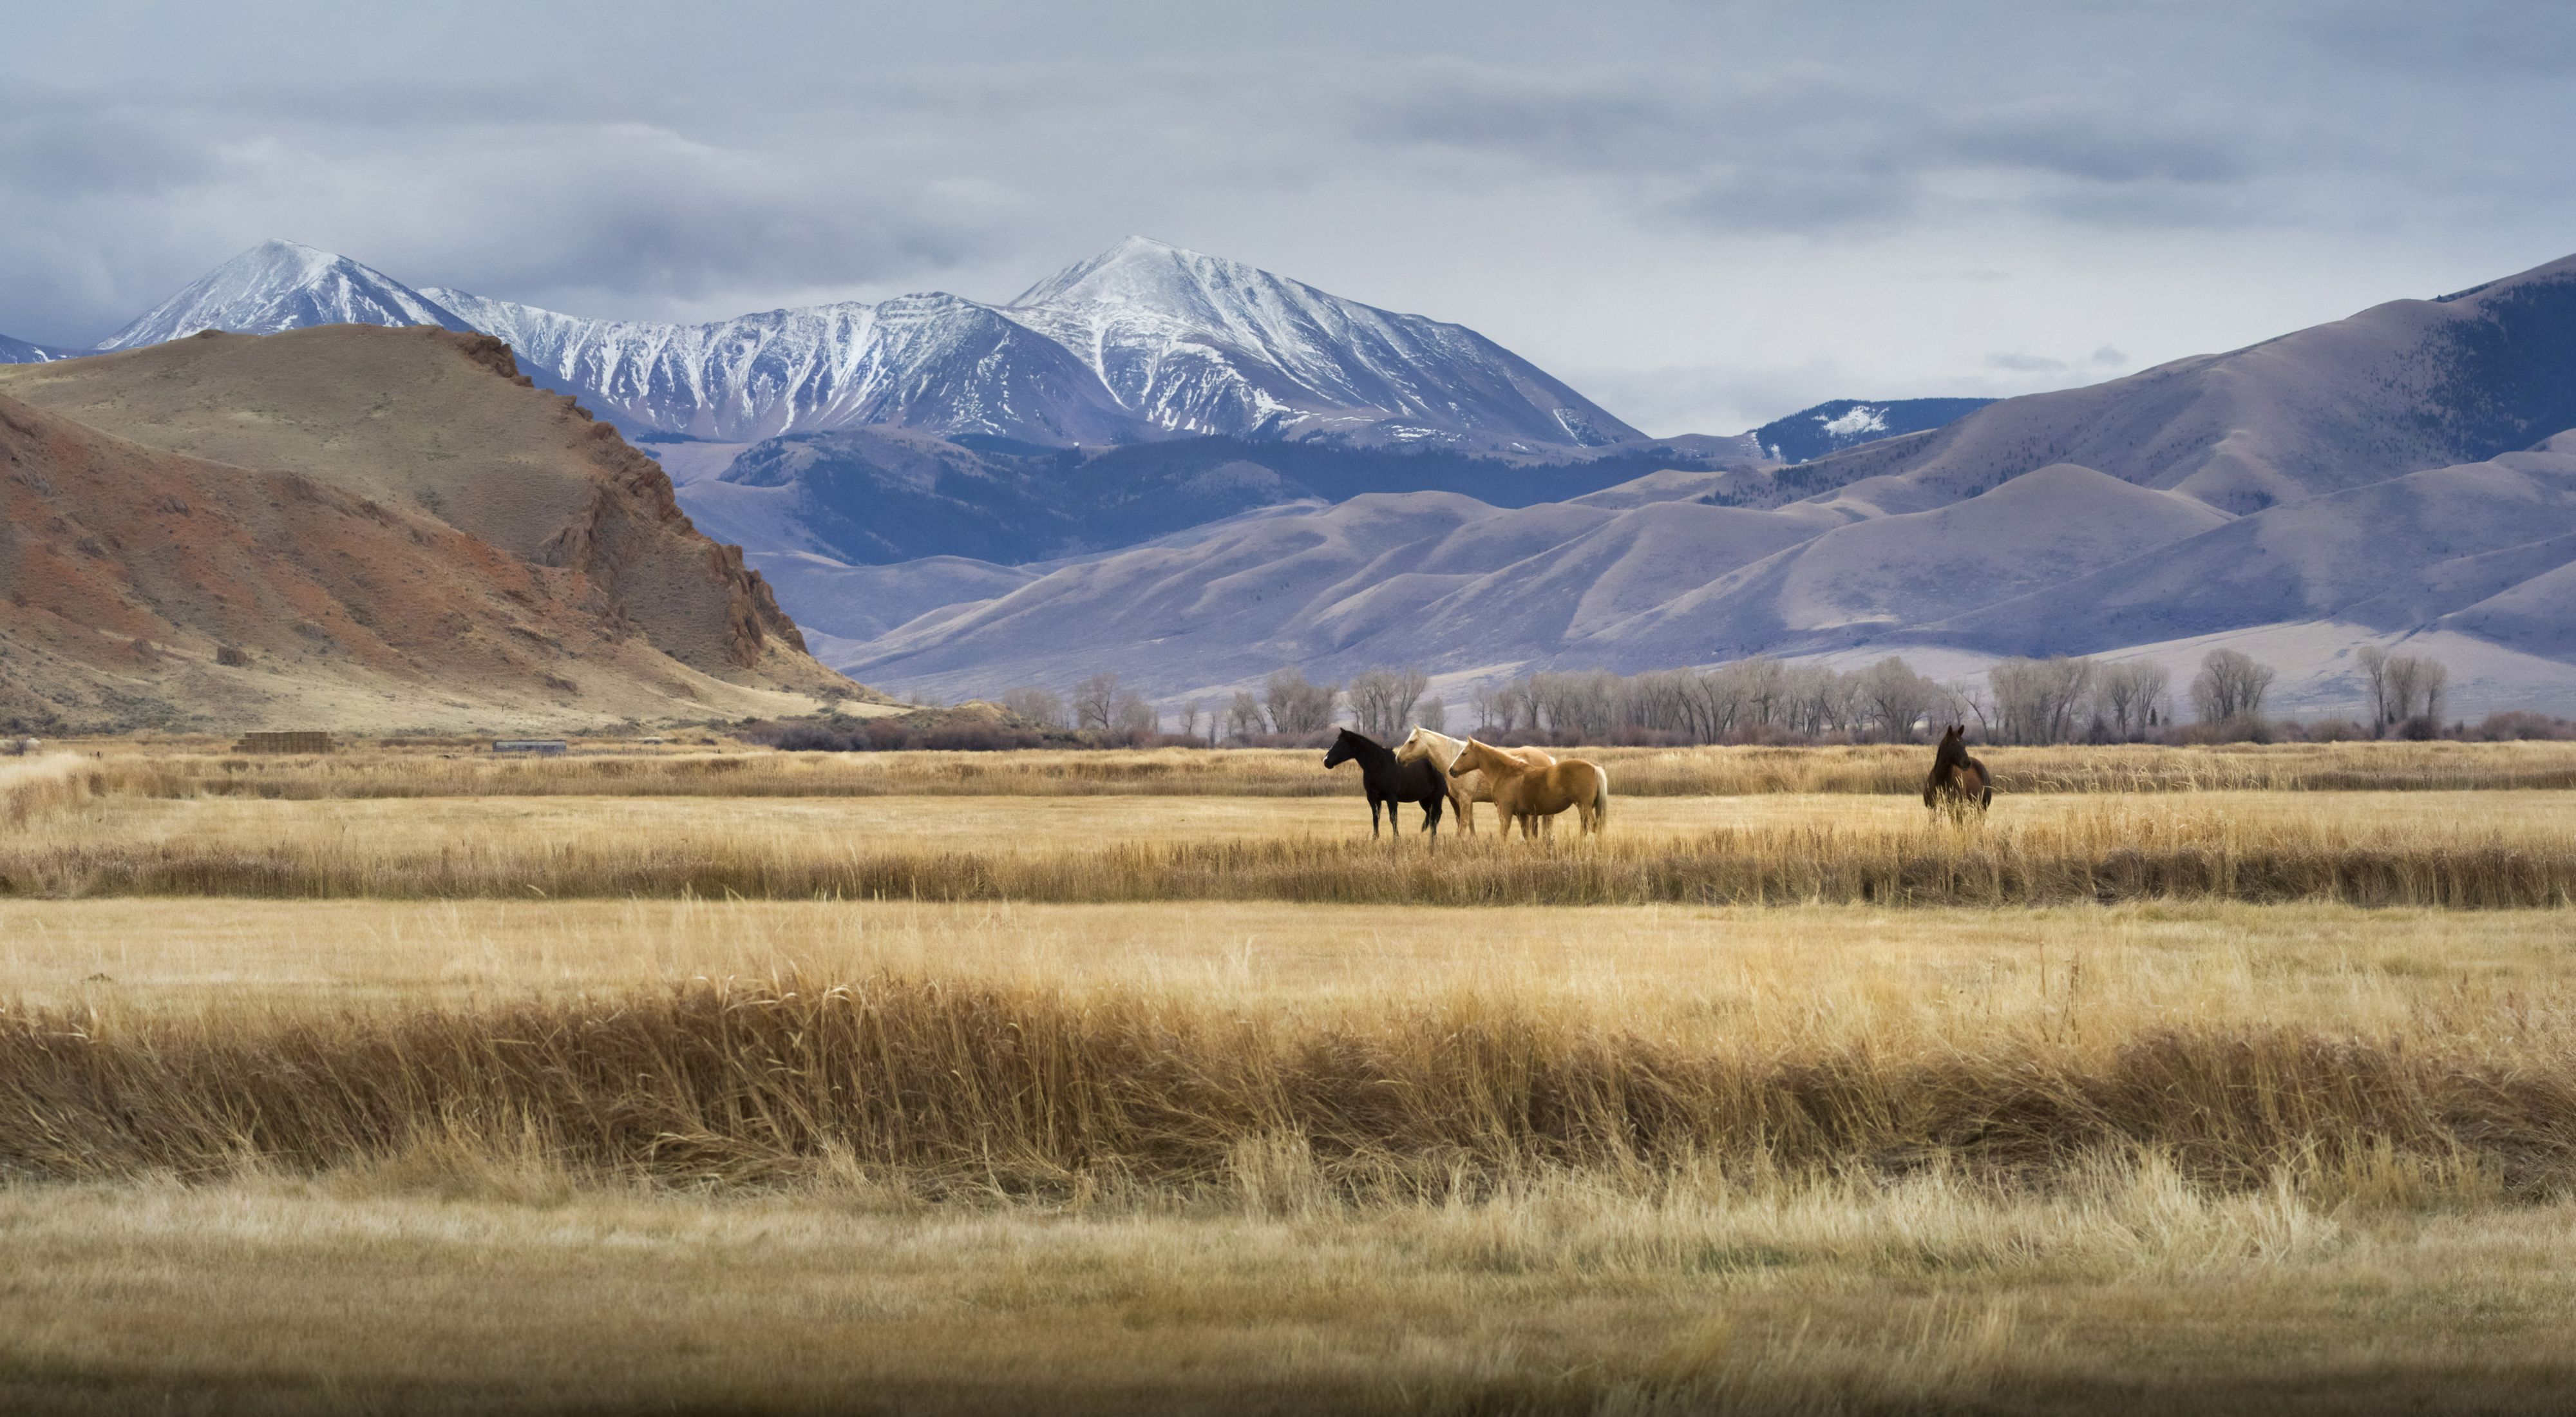 Montana landscape with horses on grasslands with snowcapped mountains in background.